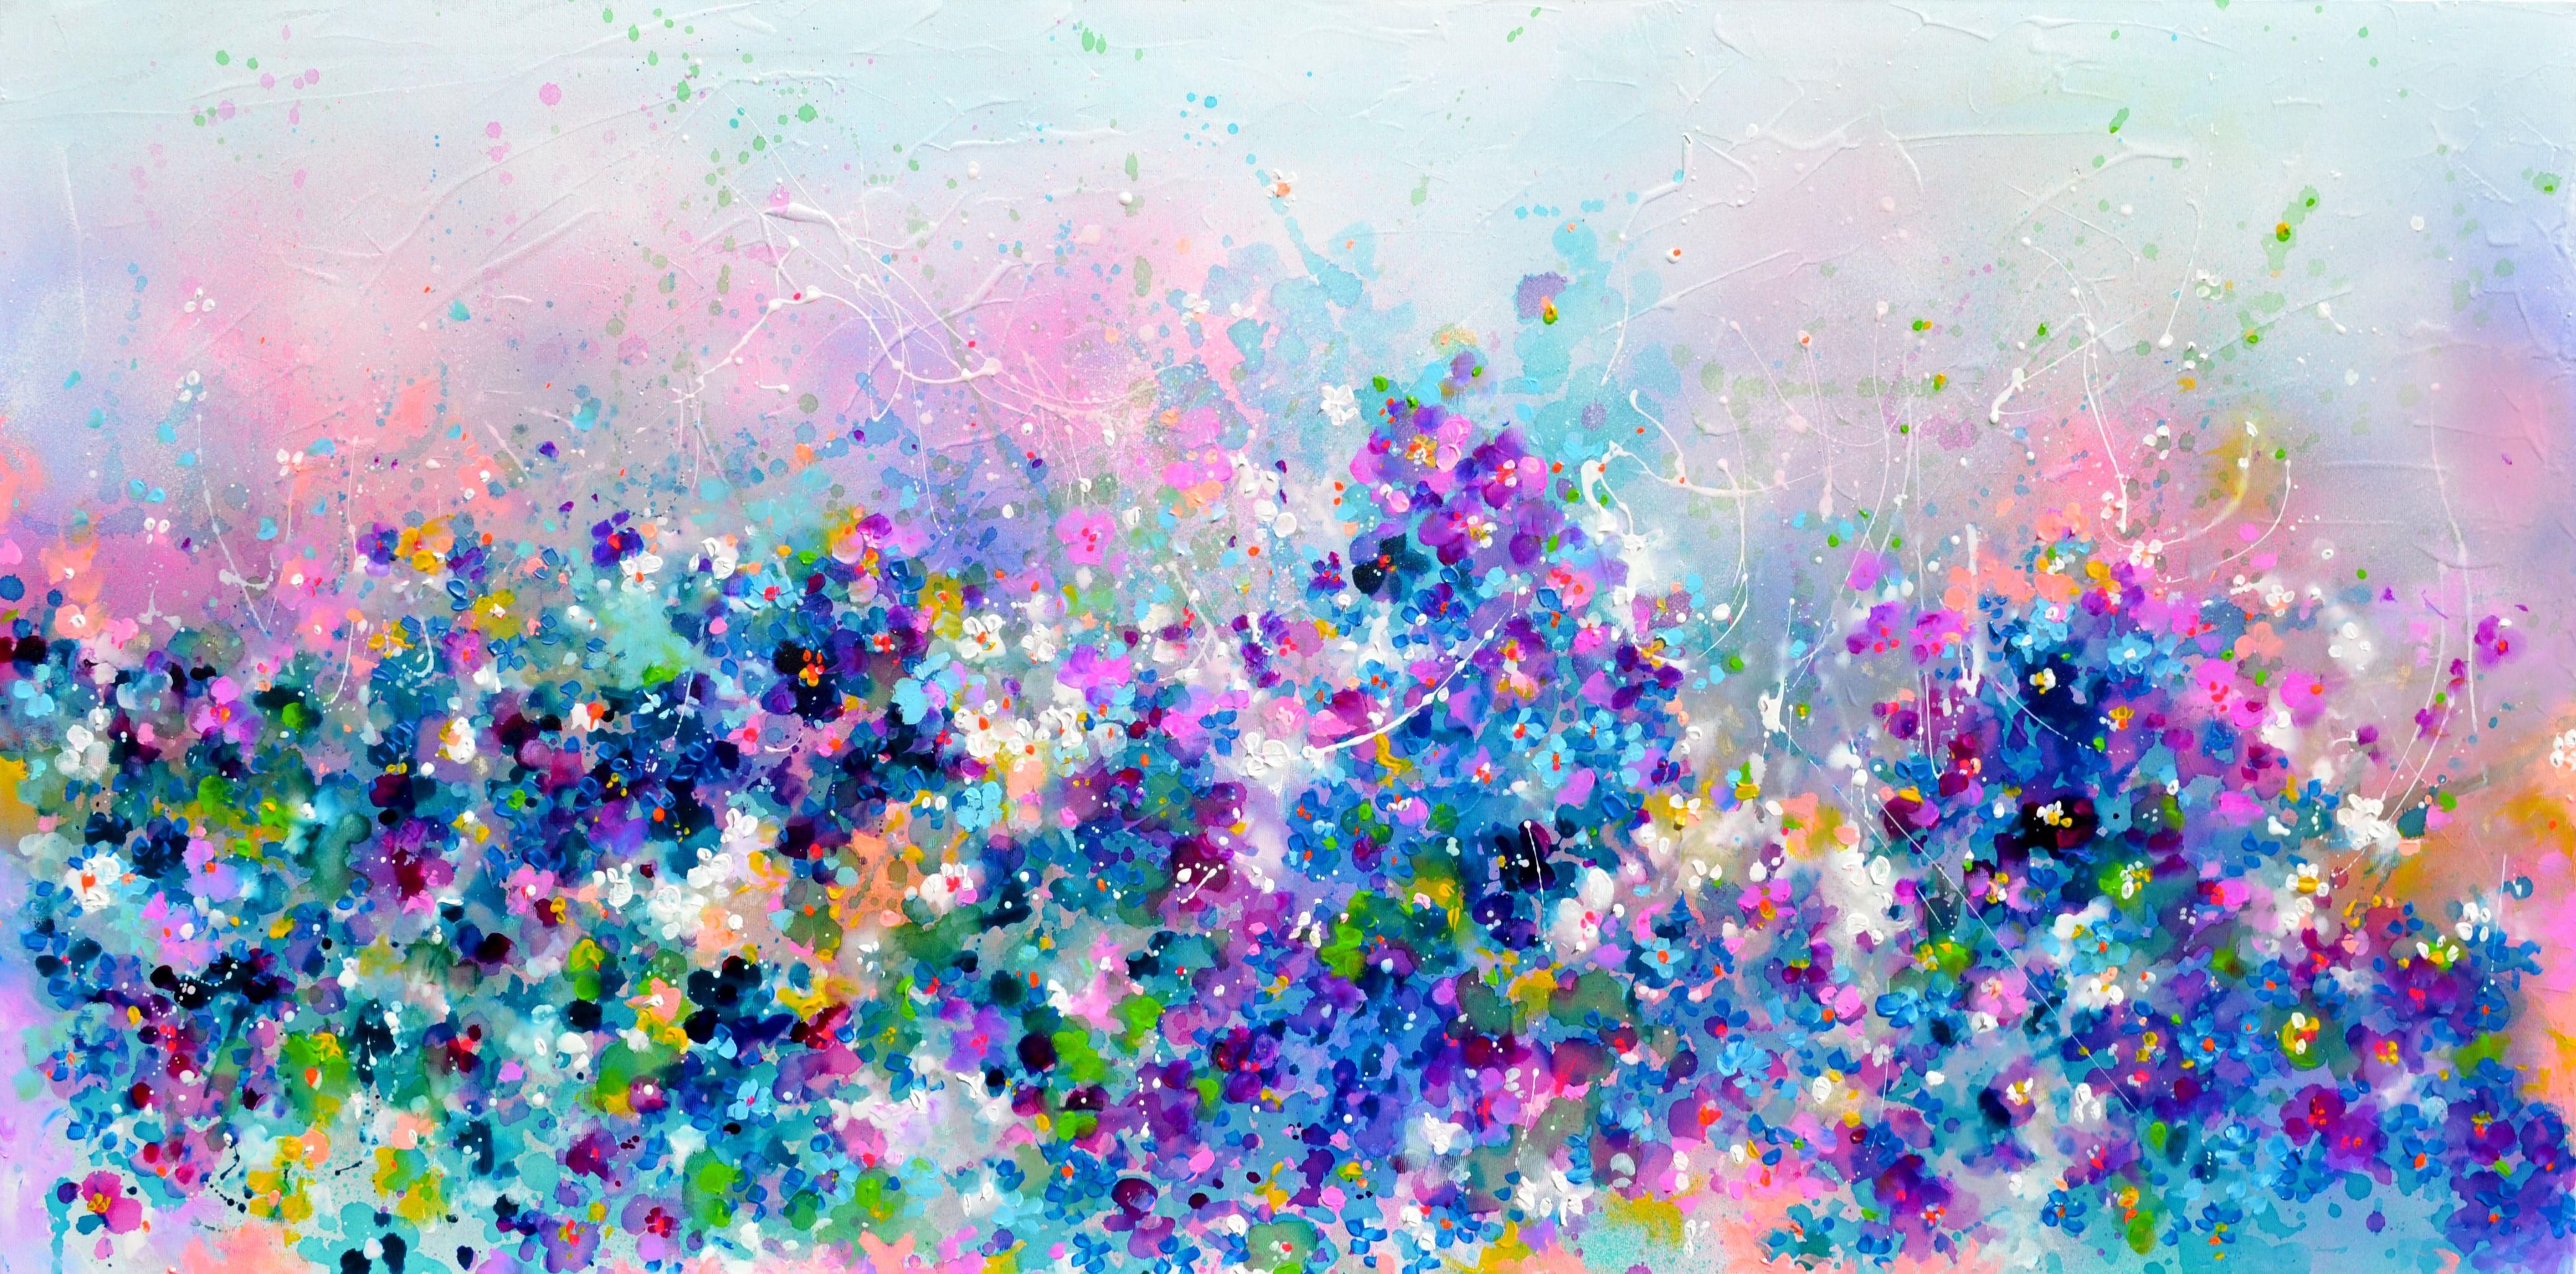 Soos Roxana Gabriela Abstract Painting - I've Dreamed 41 - Wild Flower Field, Painting, Acrylic on Canvas